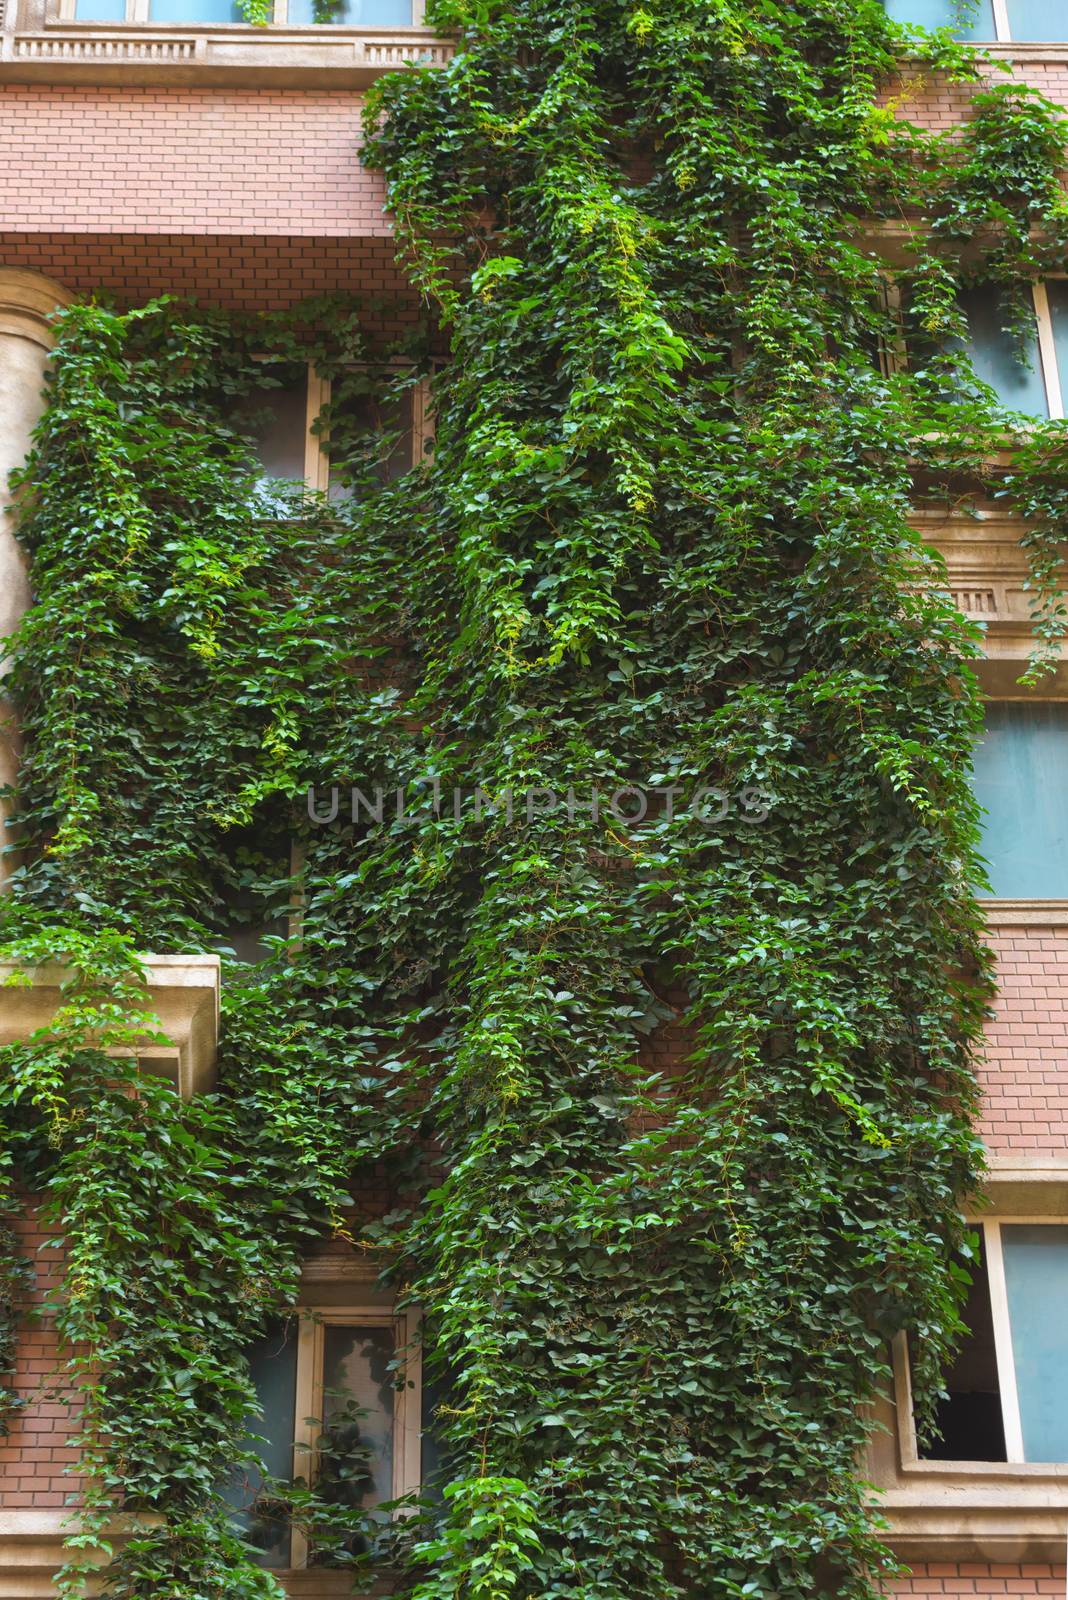 Green building with plants growing on the facade. Green living wall